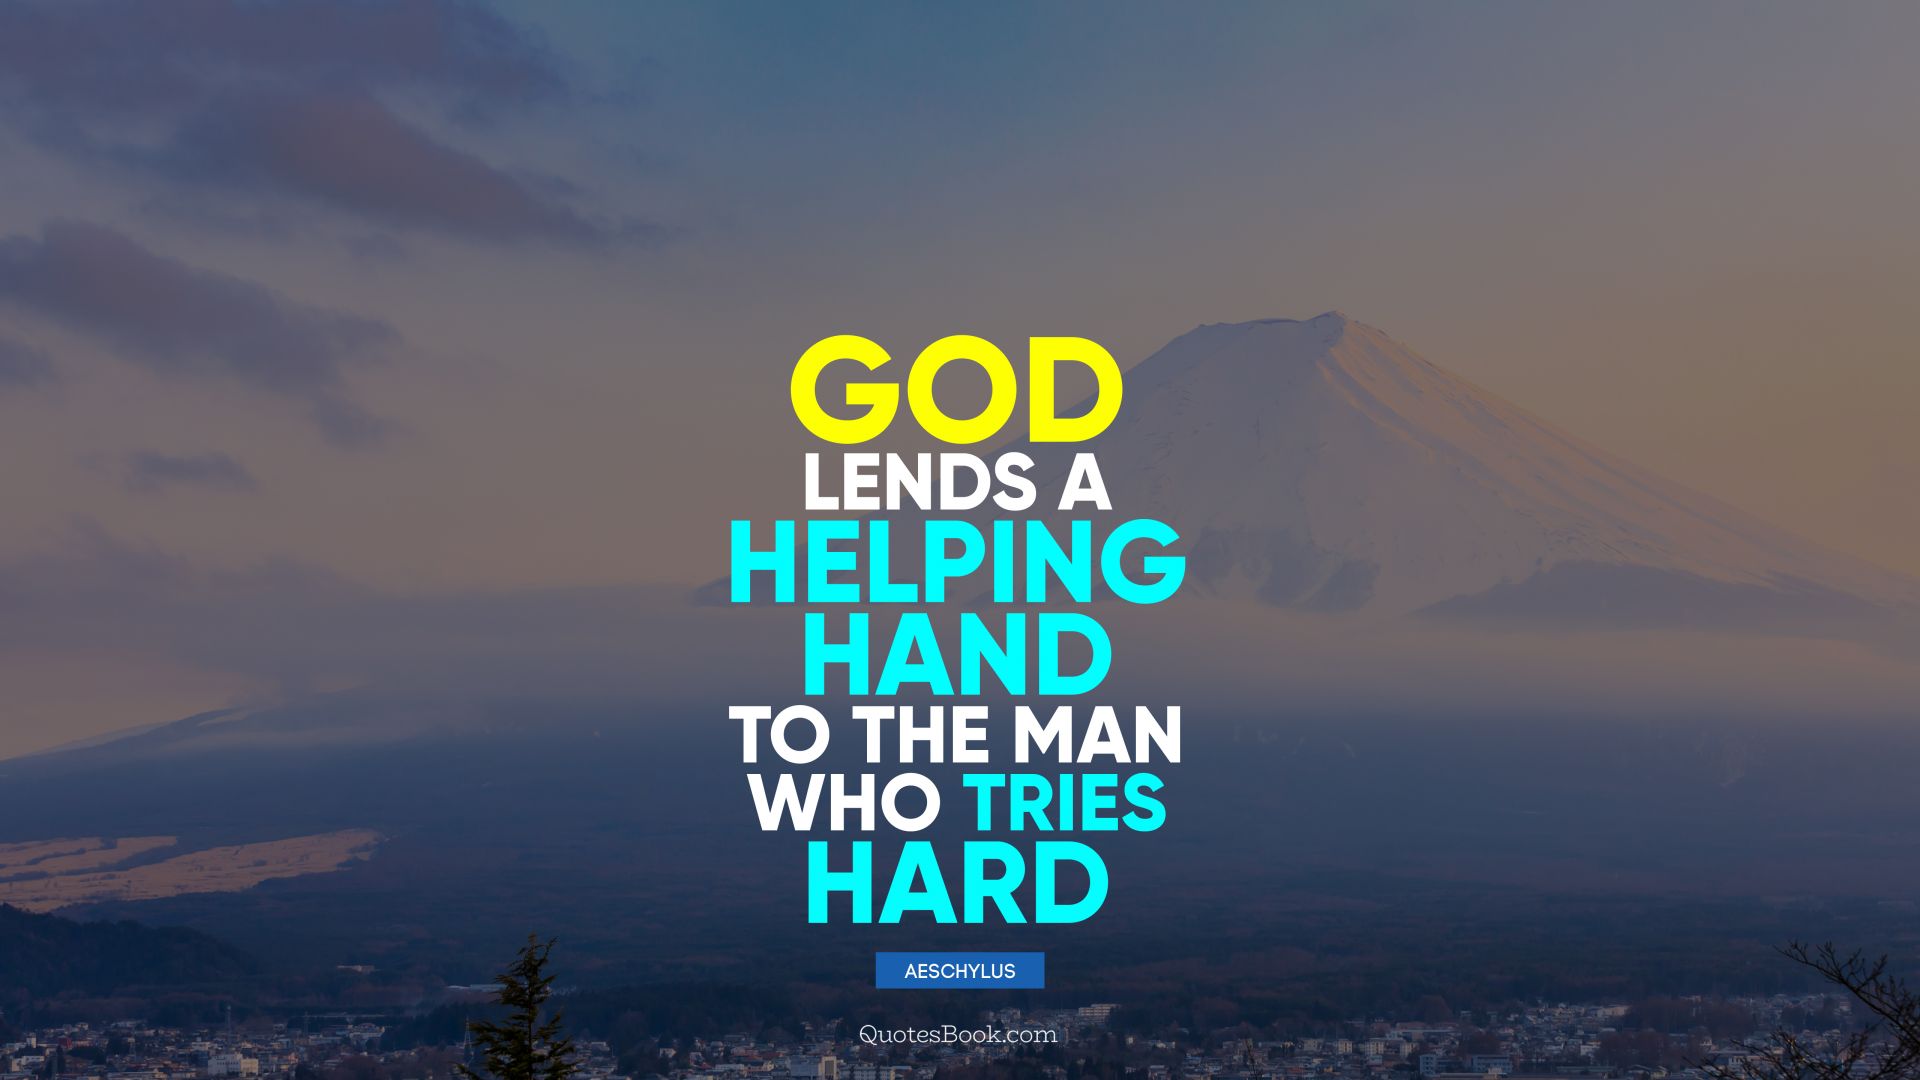 God lends a helping hand to the man who tries hard. - Quote by Aeschylus